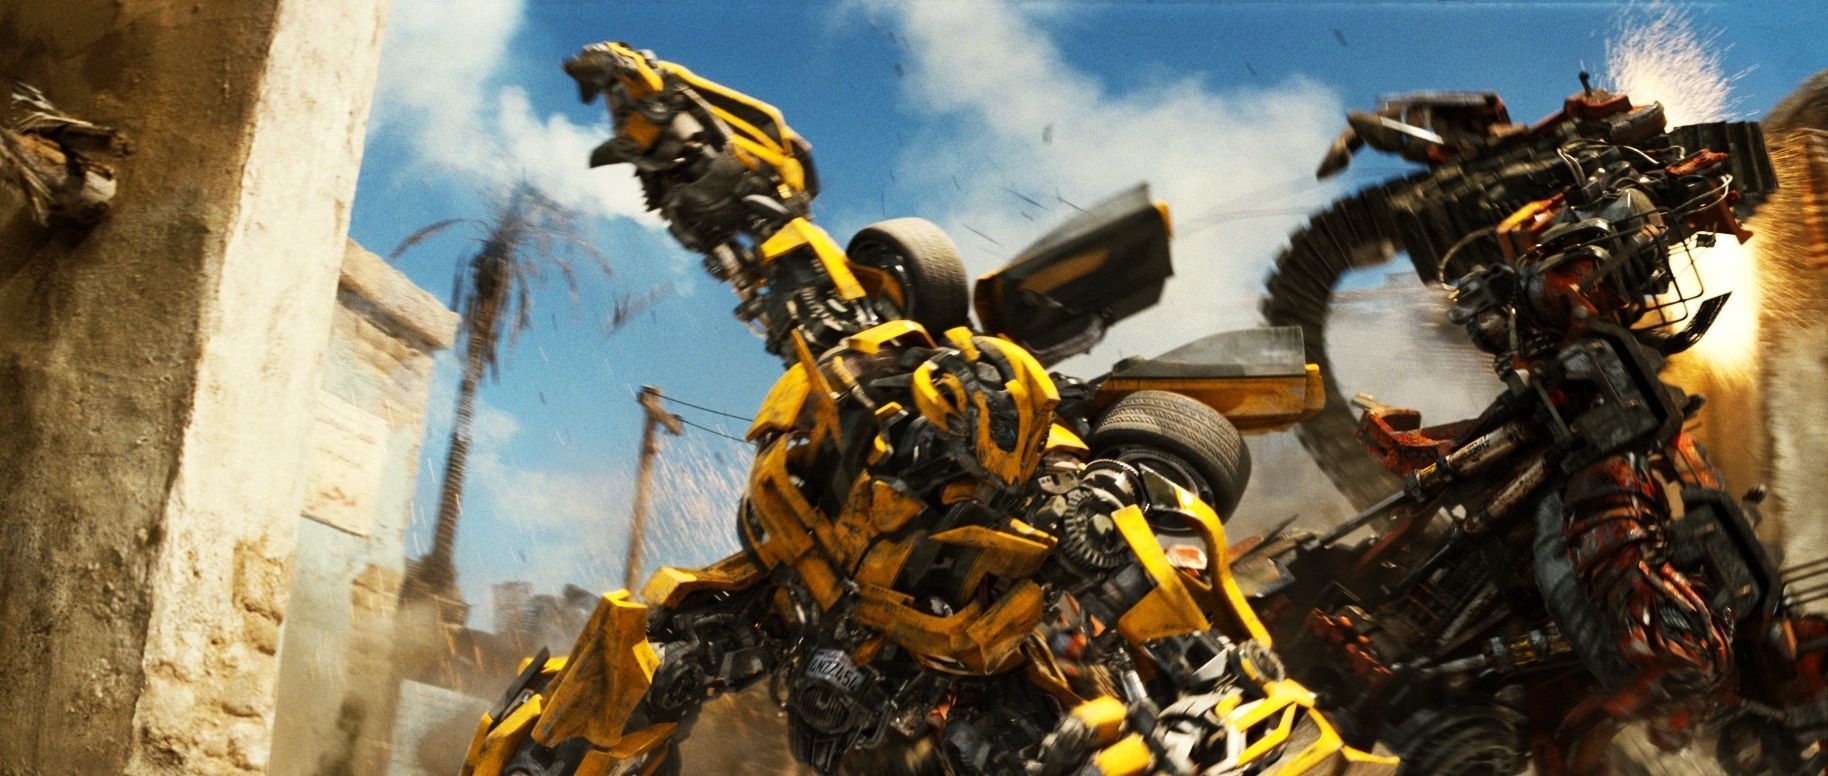 Transformers 2 Bumblebee in action